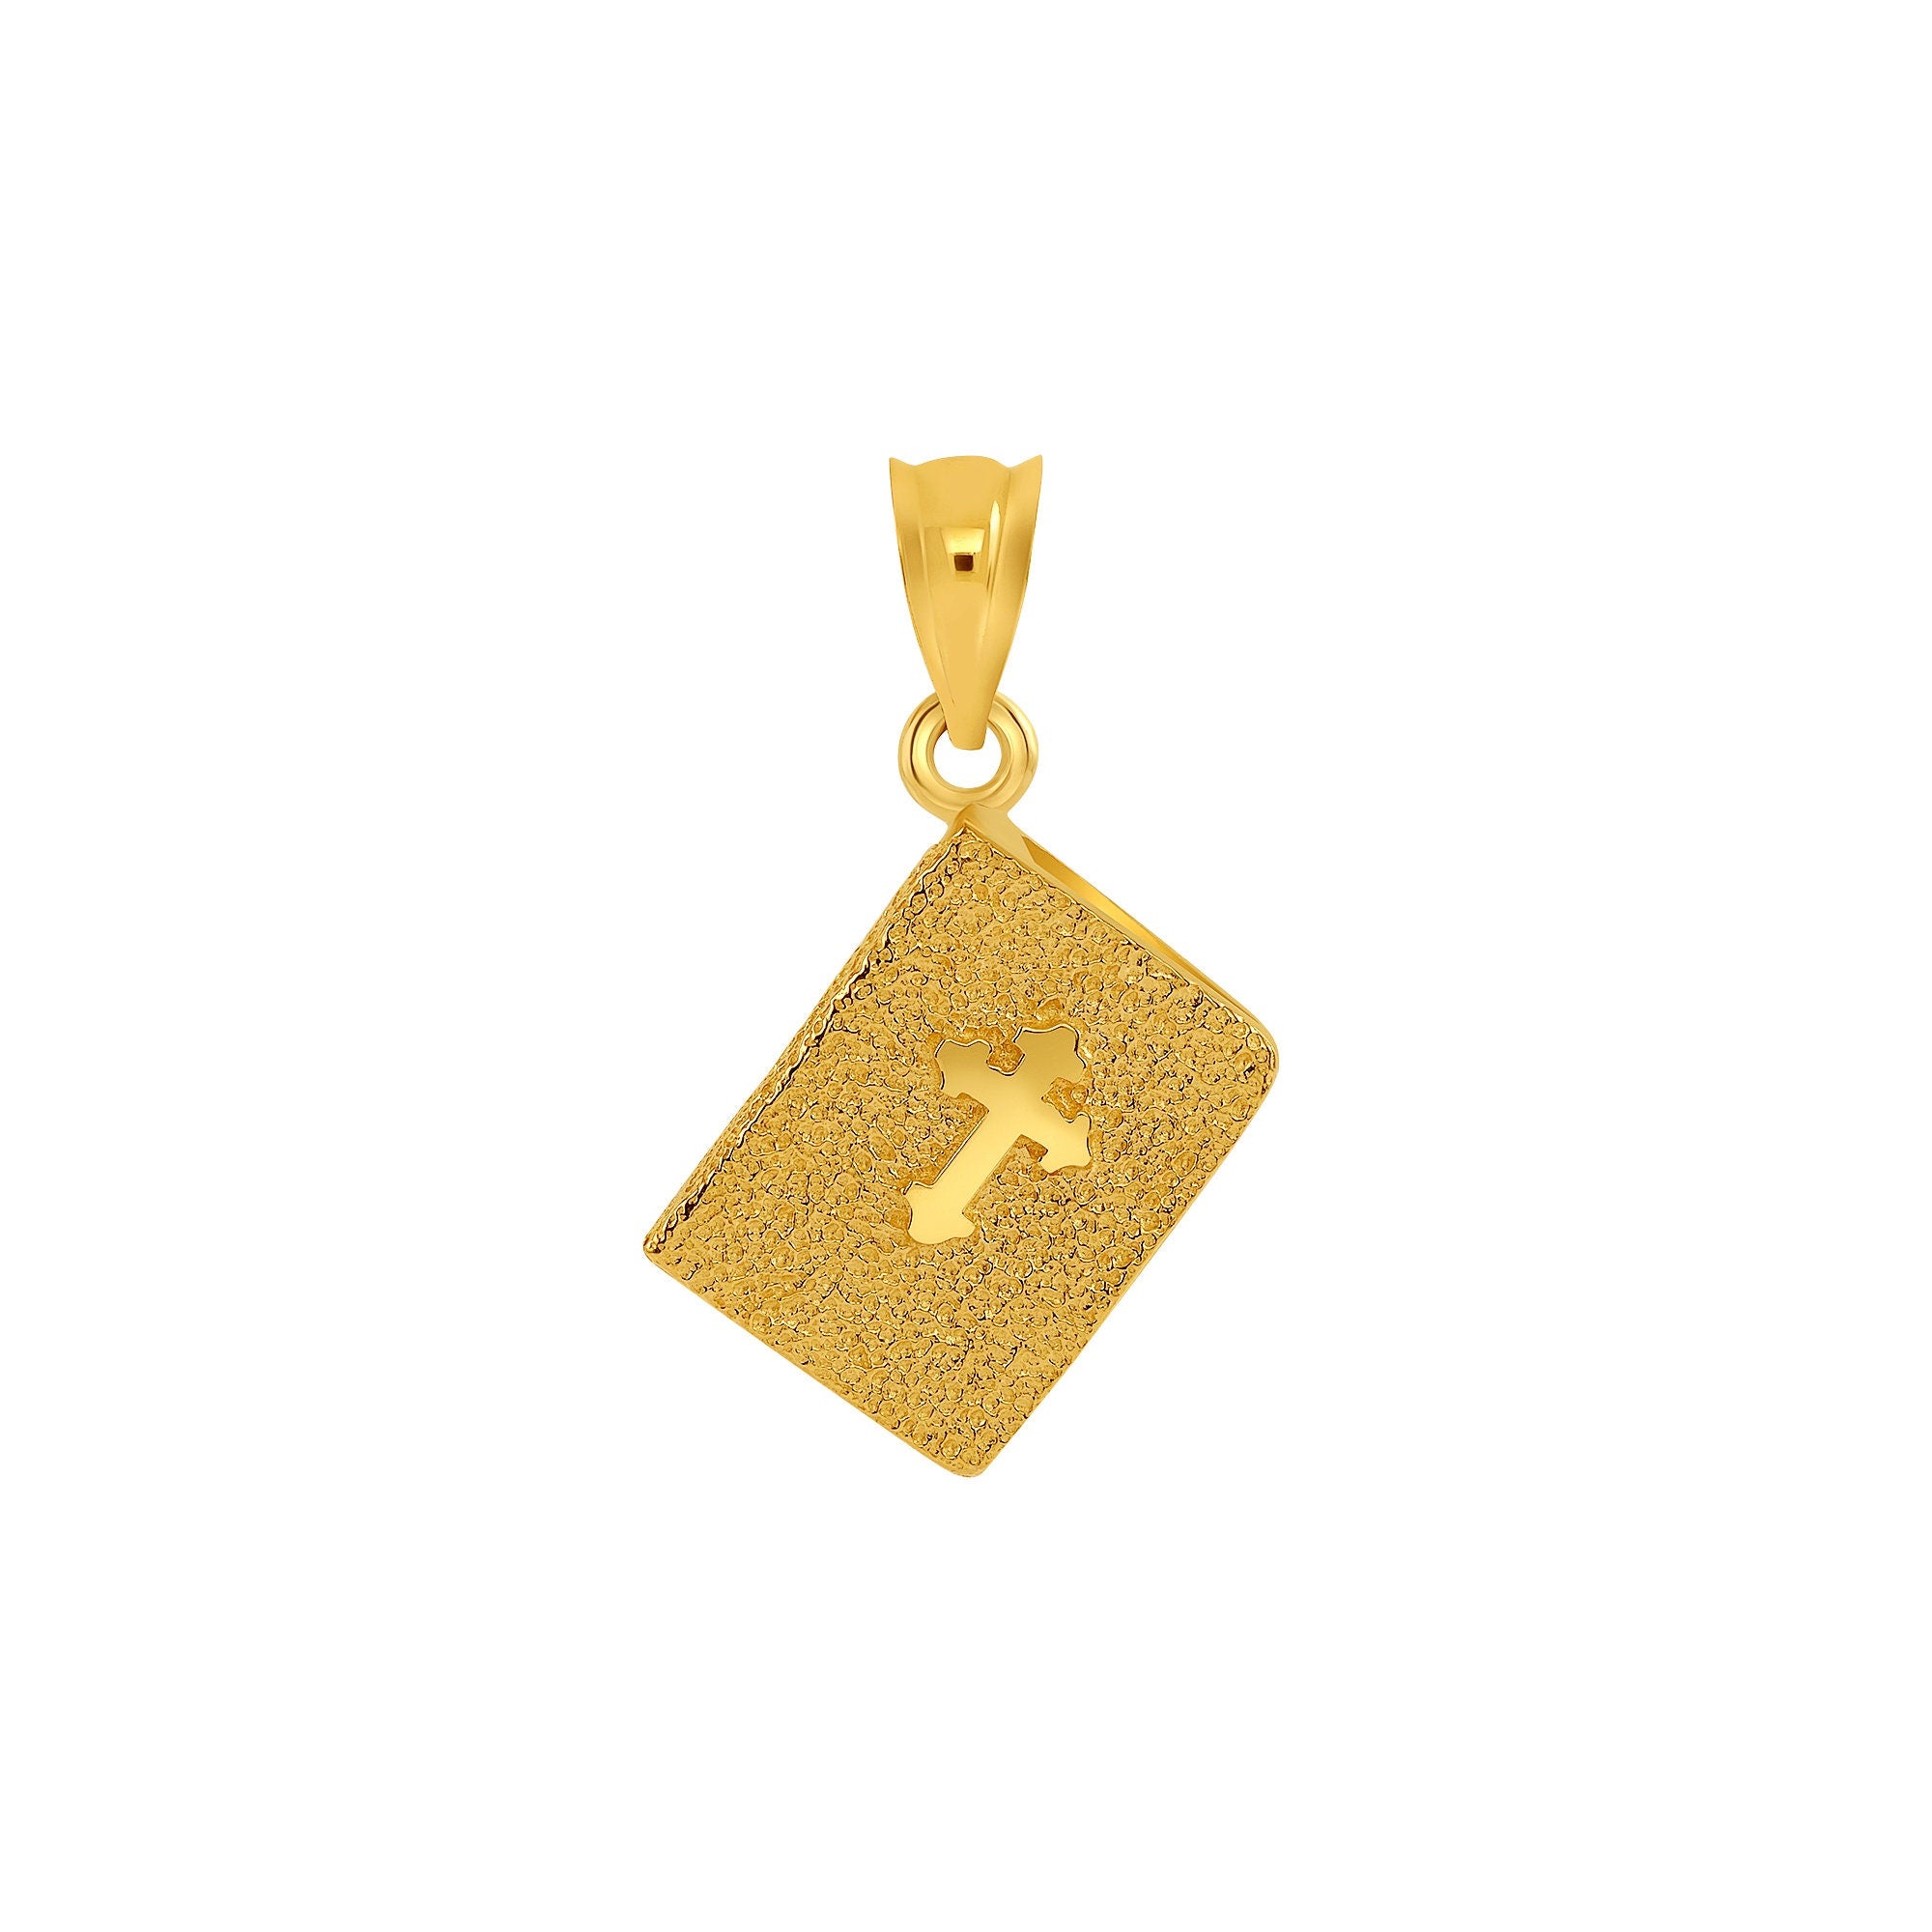 14k solid gold Bible pendant with cross